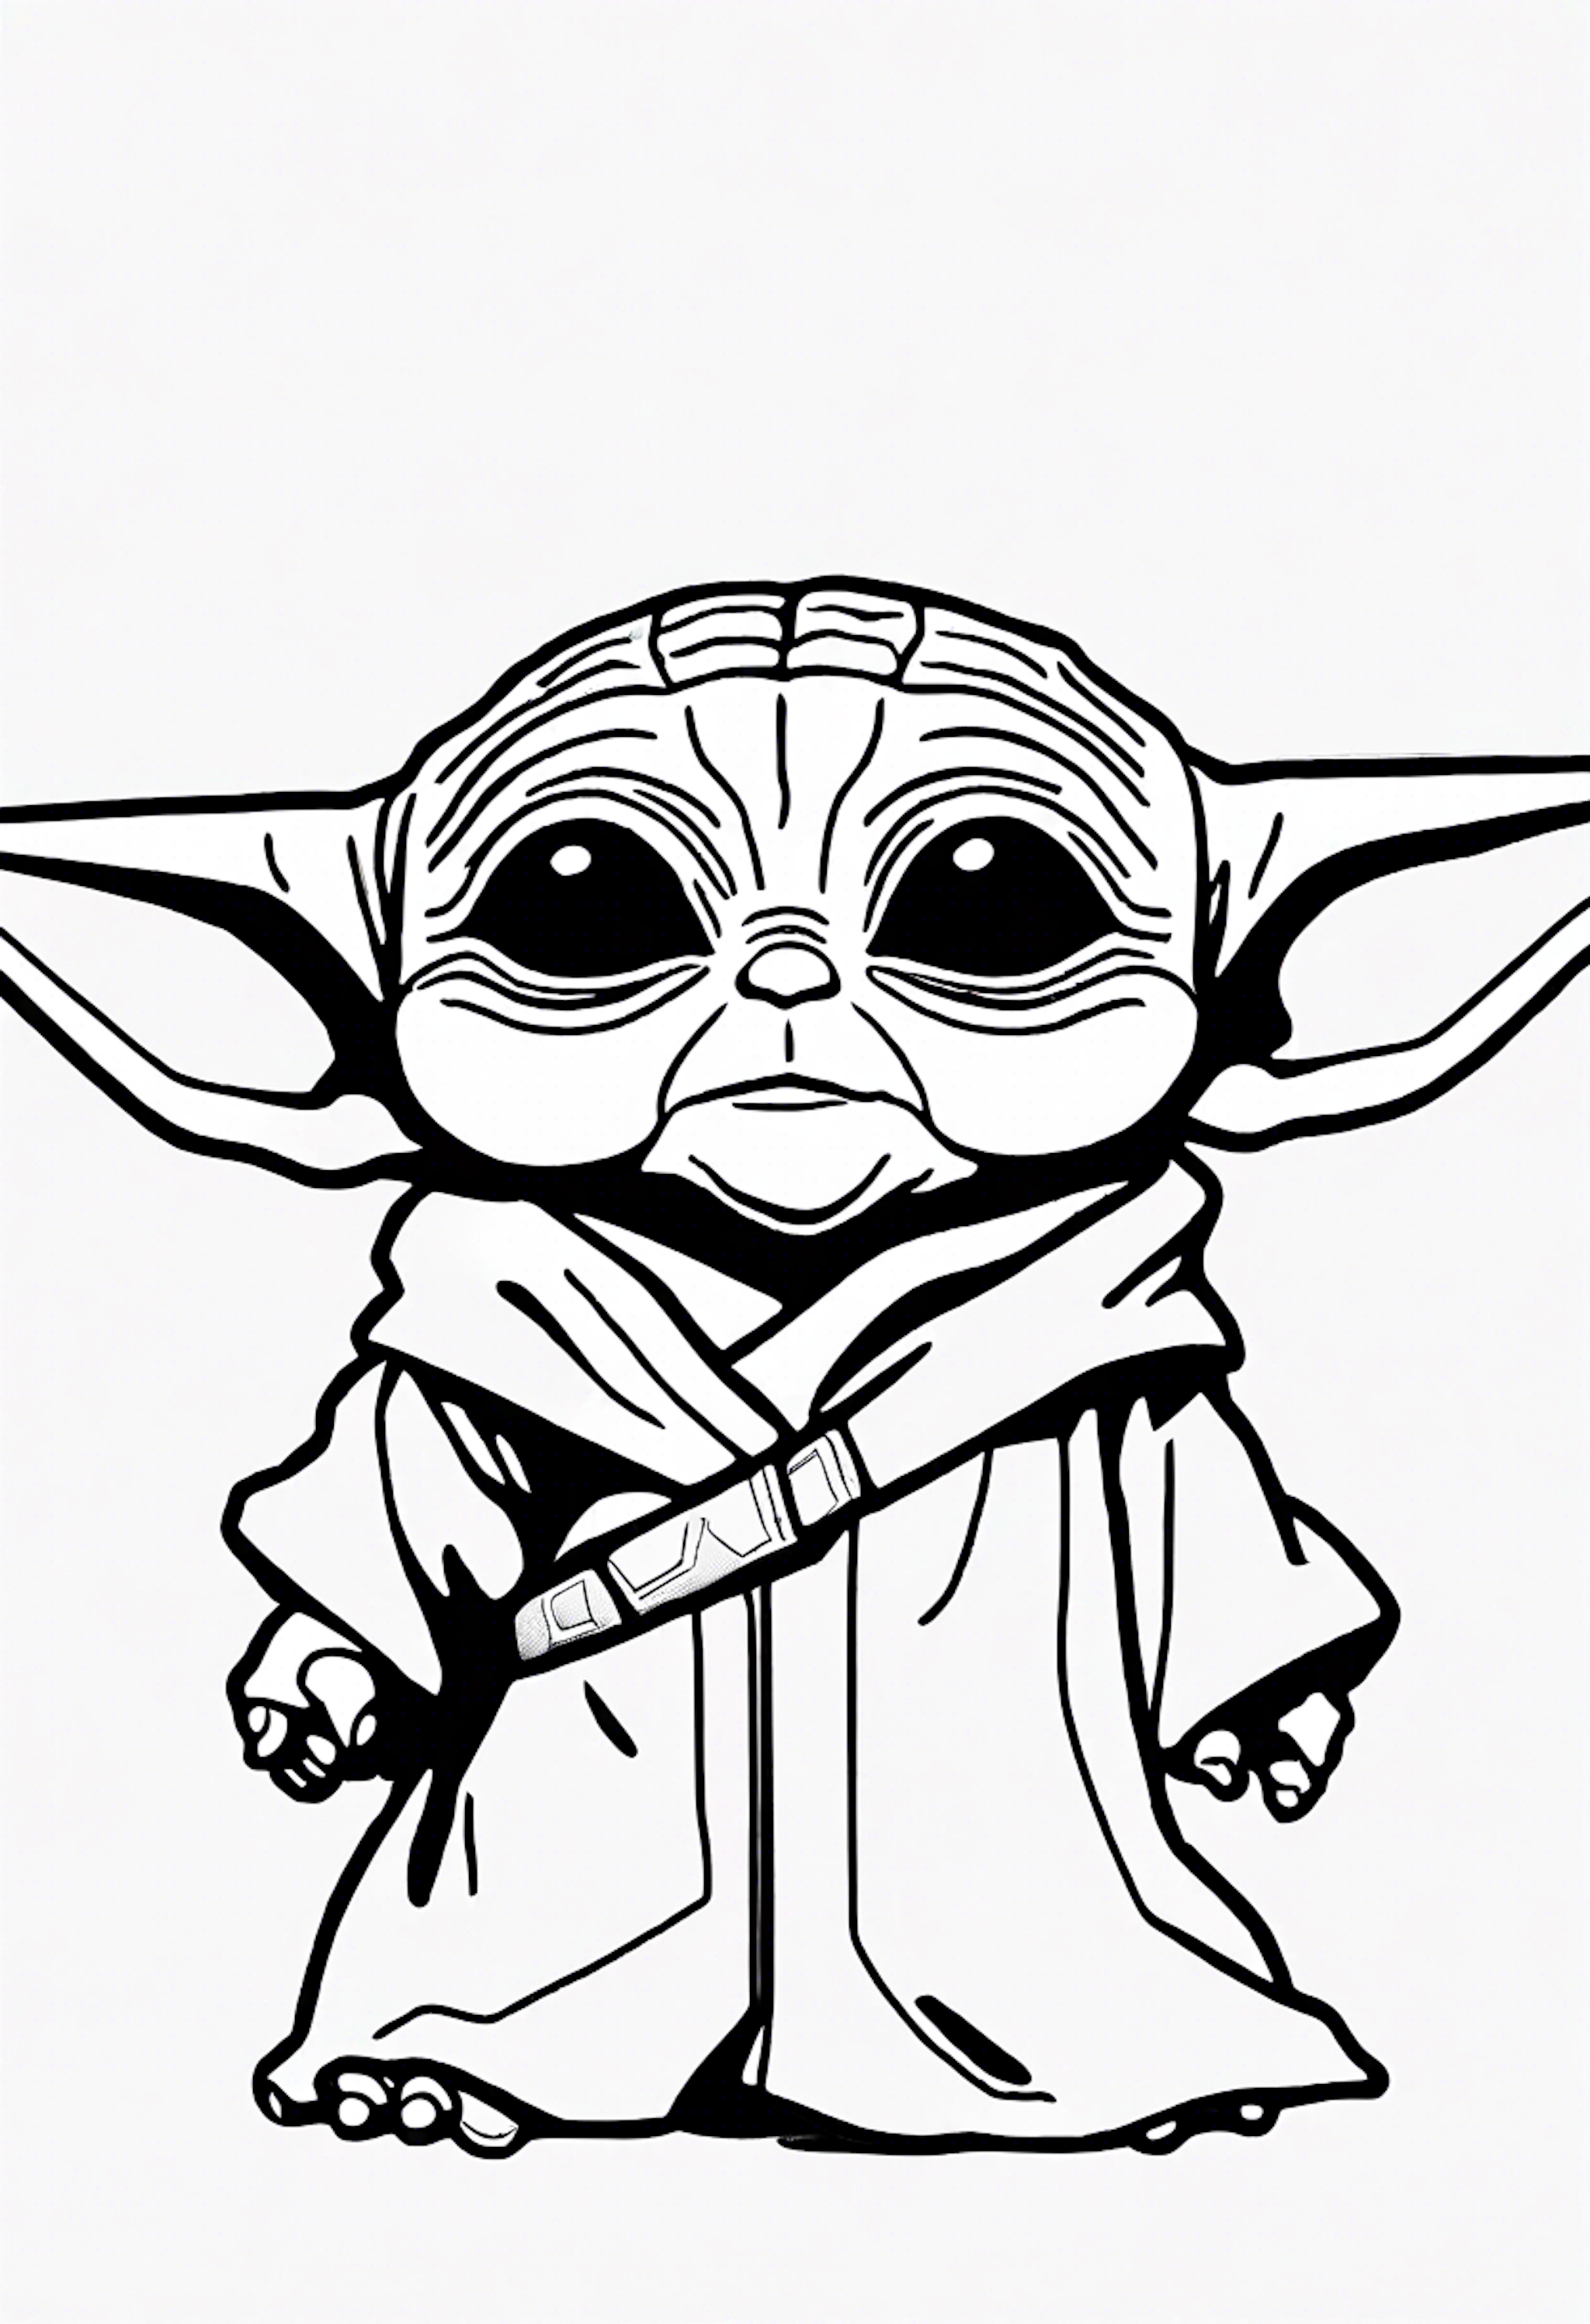 A coloring page for 1 Baby Yoda coloring pages